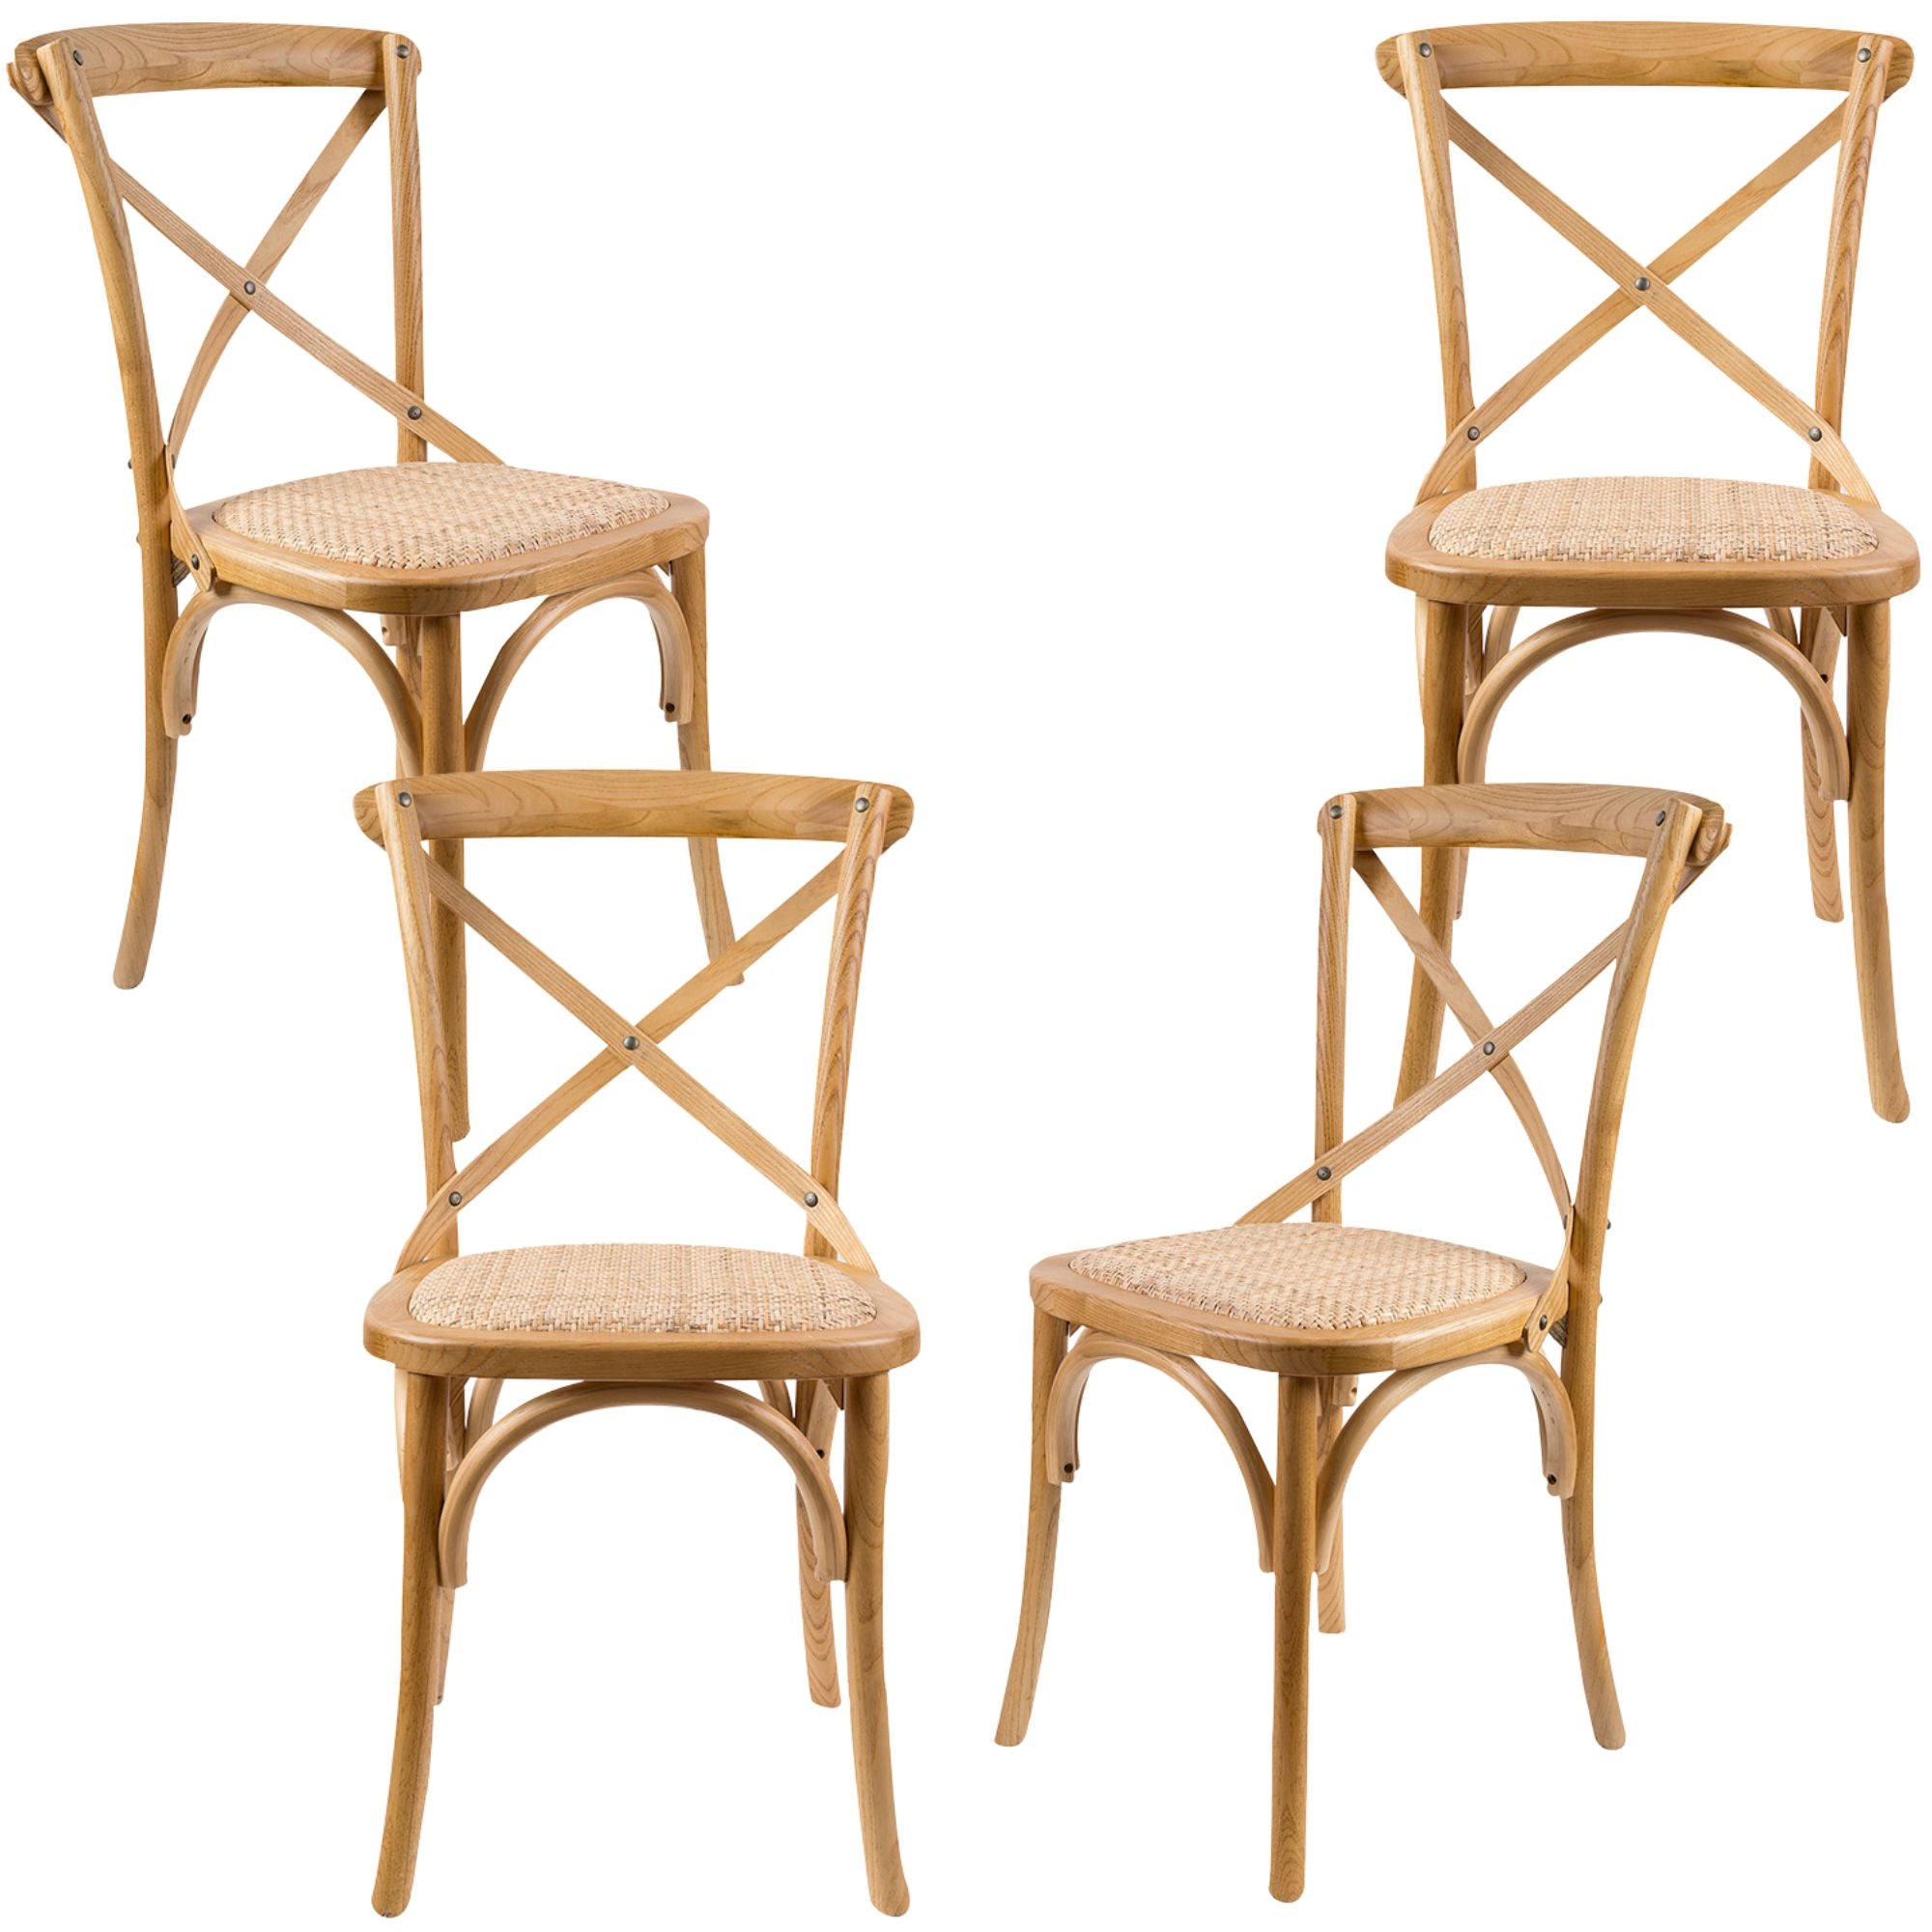 aster-crossback-dining-chair-set-of-4-solid-birch-timber-wood-ratan-seat-oak